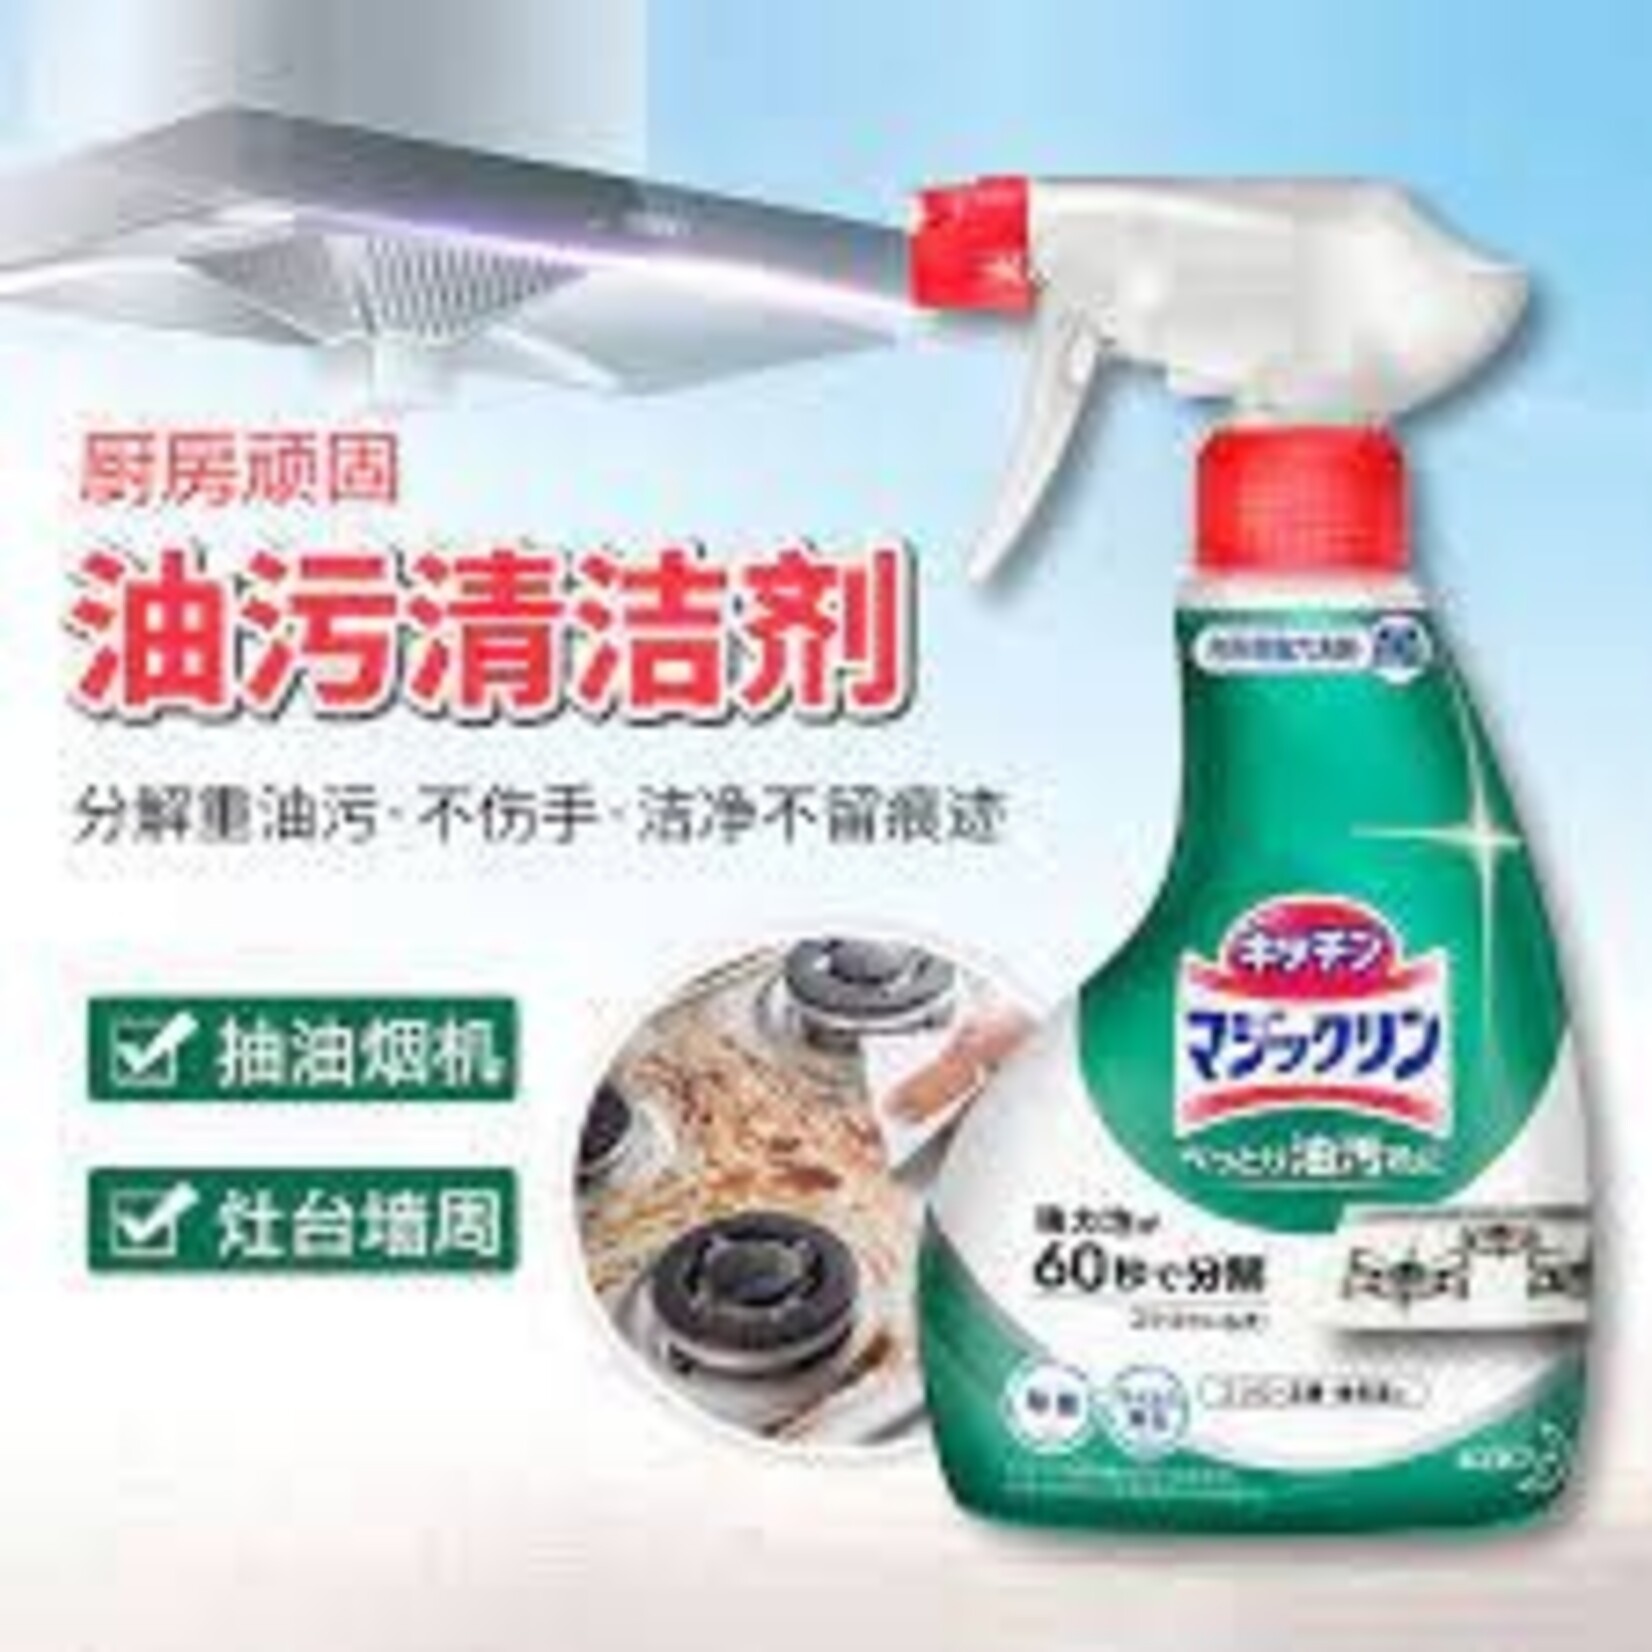 KAO KAO Magic Clean Foam Type Strong Kitchen Cleaner Spray Bottle 400ml